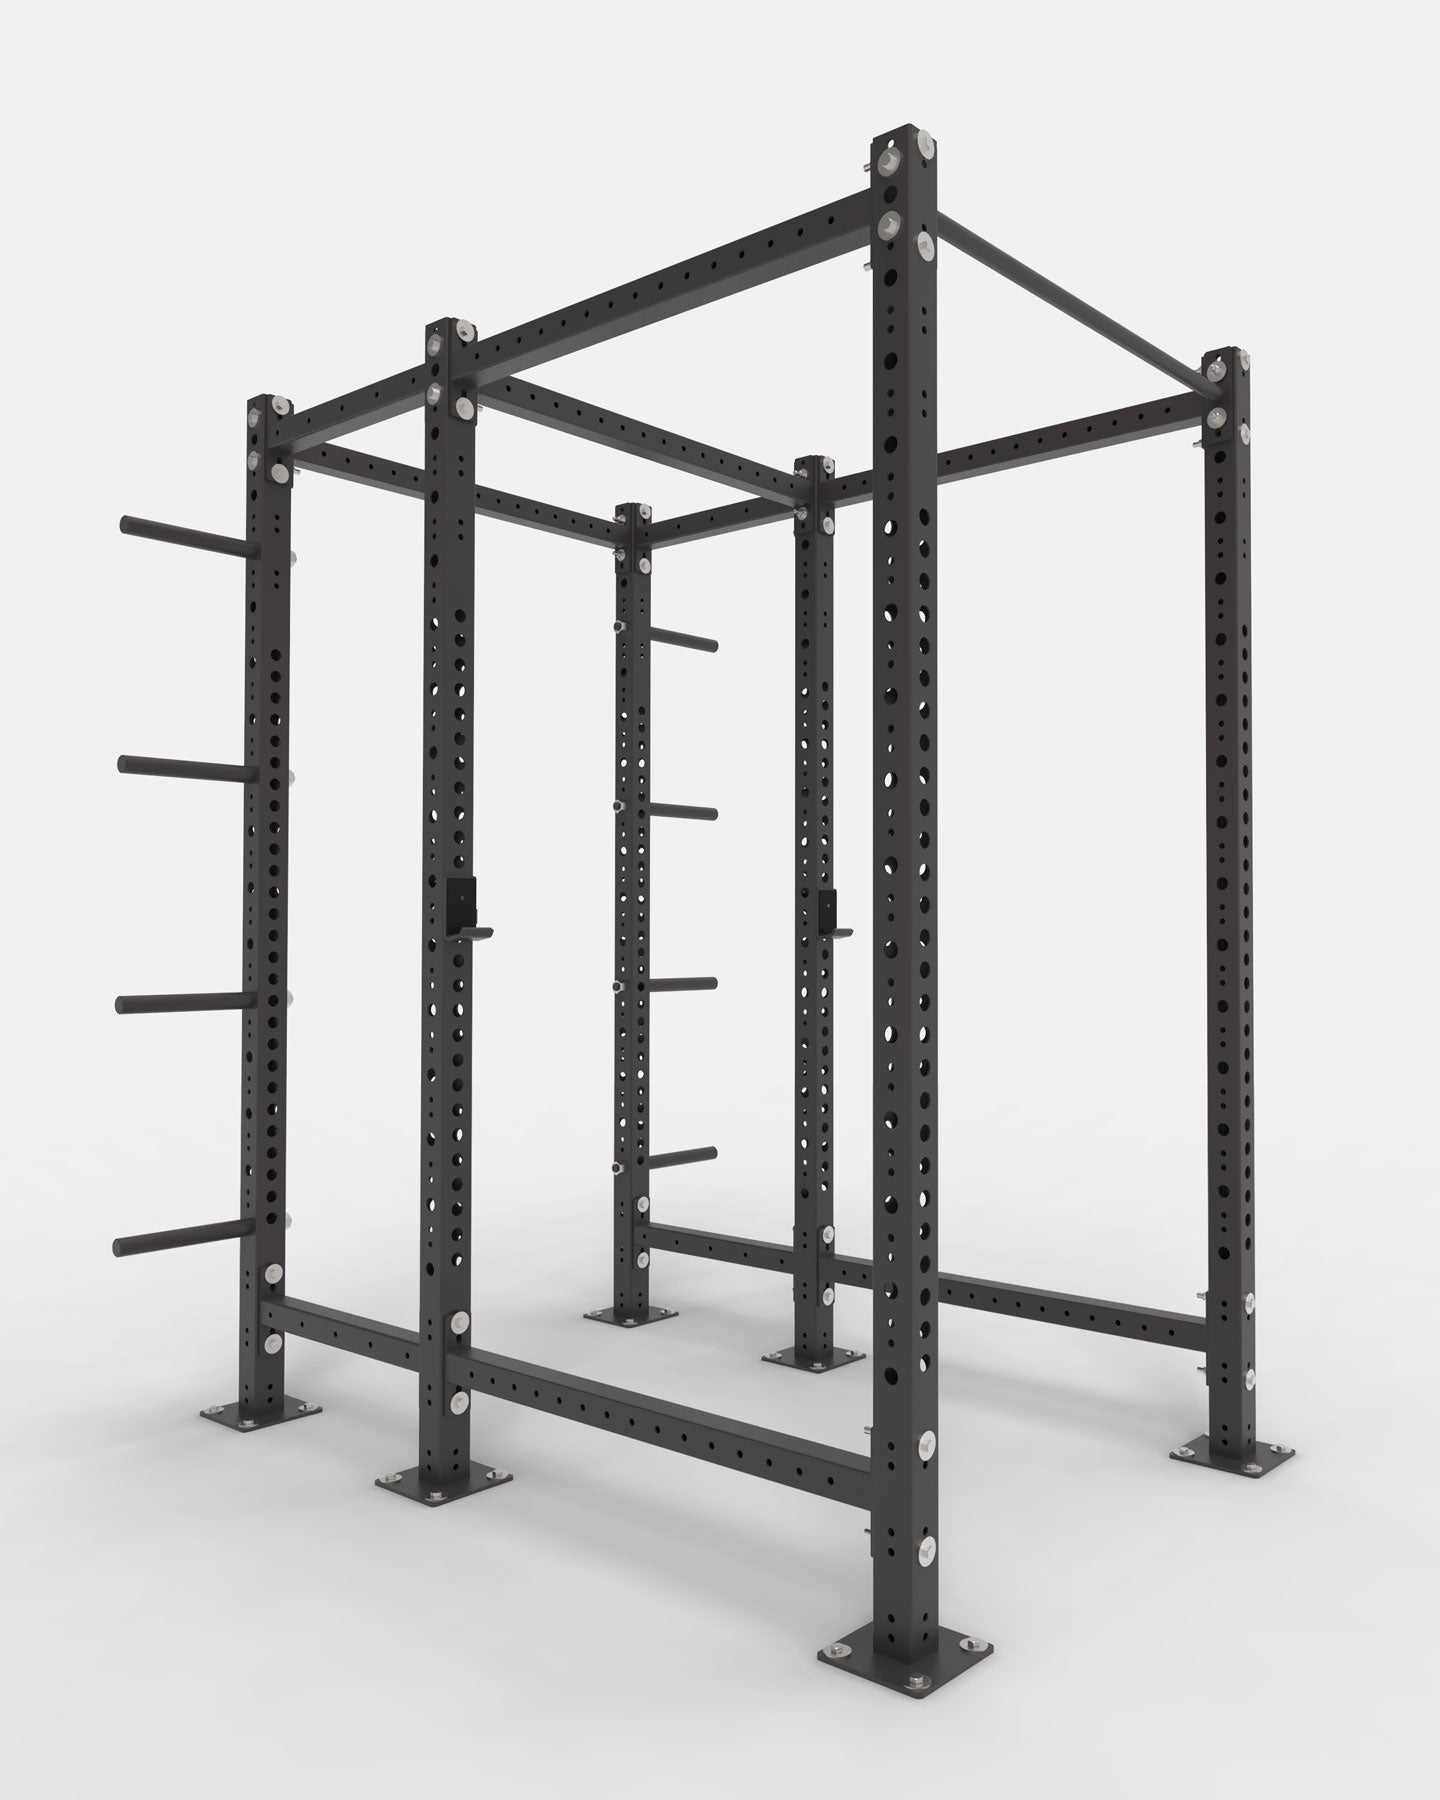 4x6 power rack for home gym